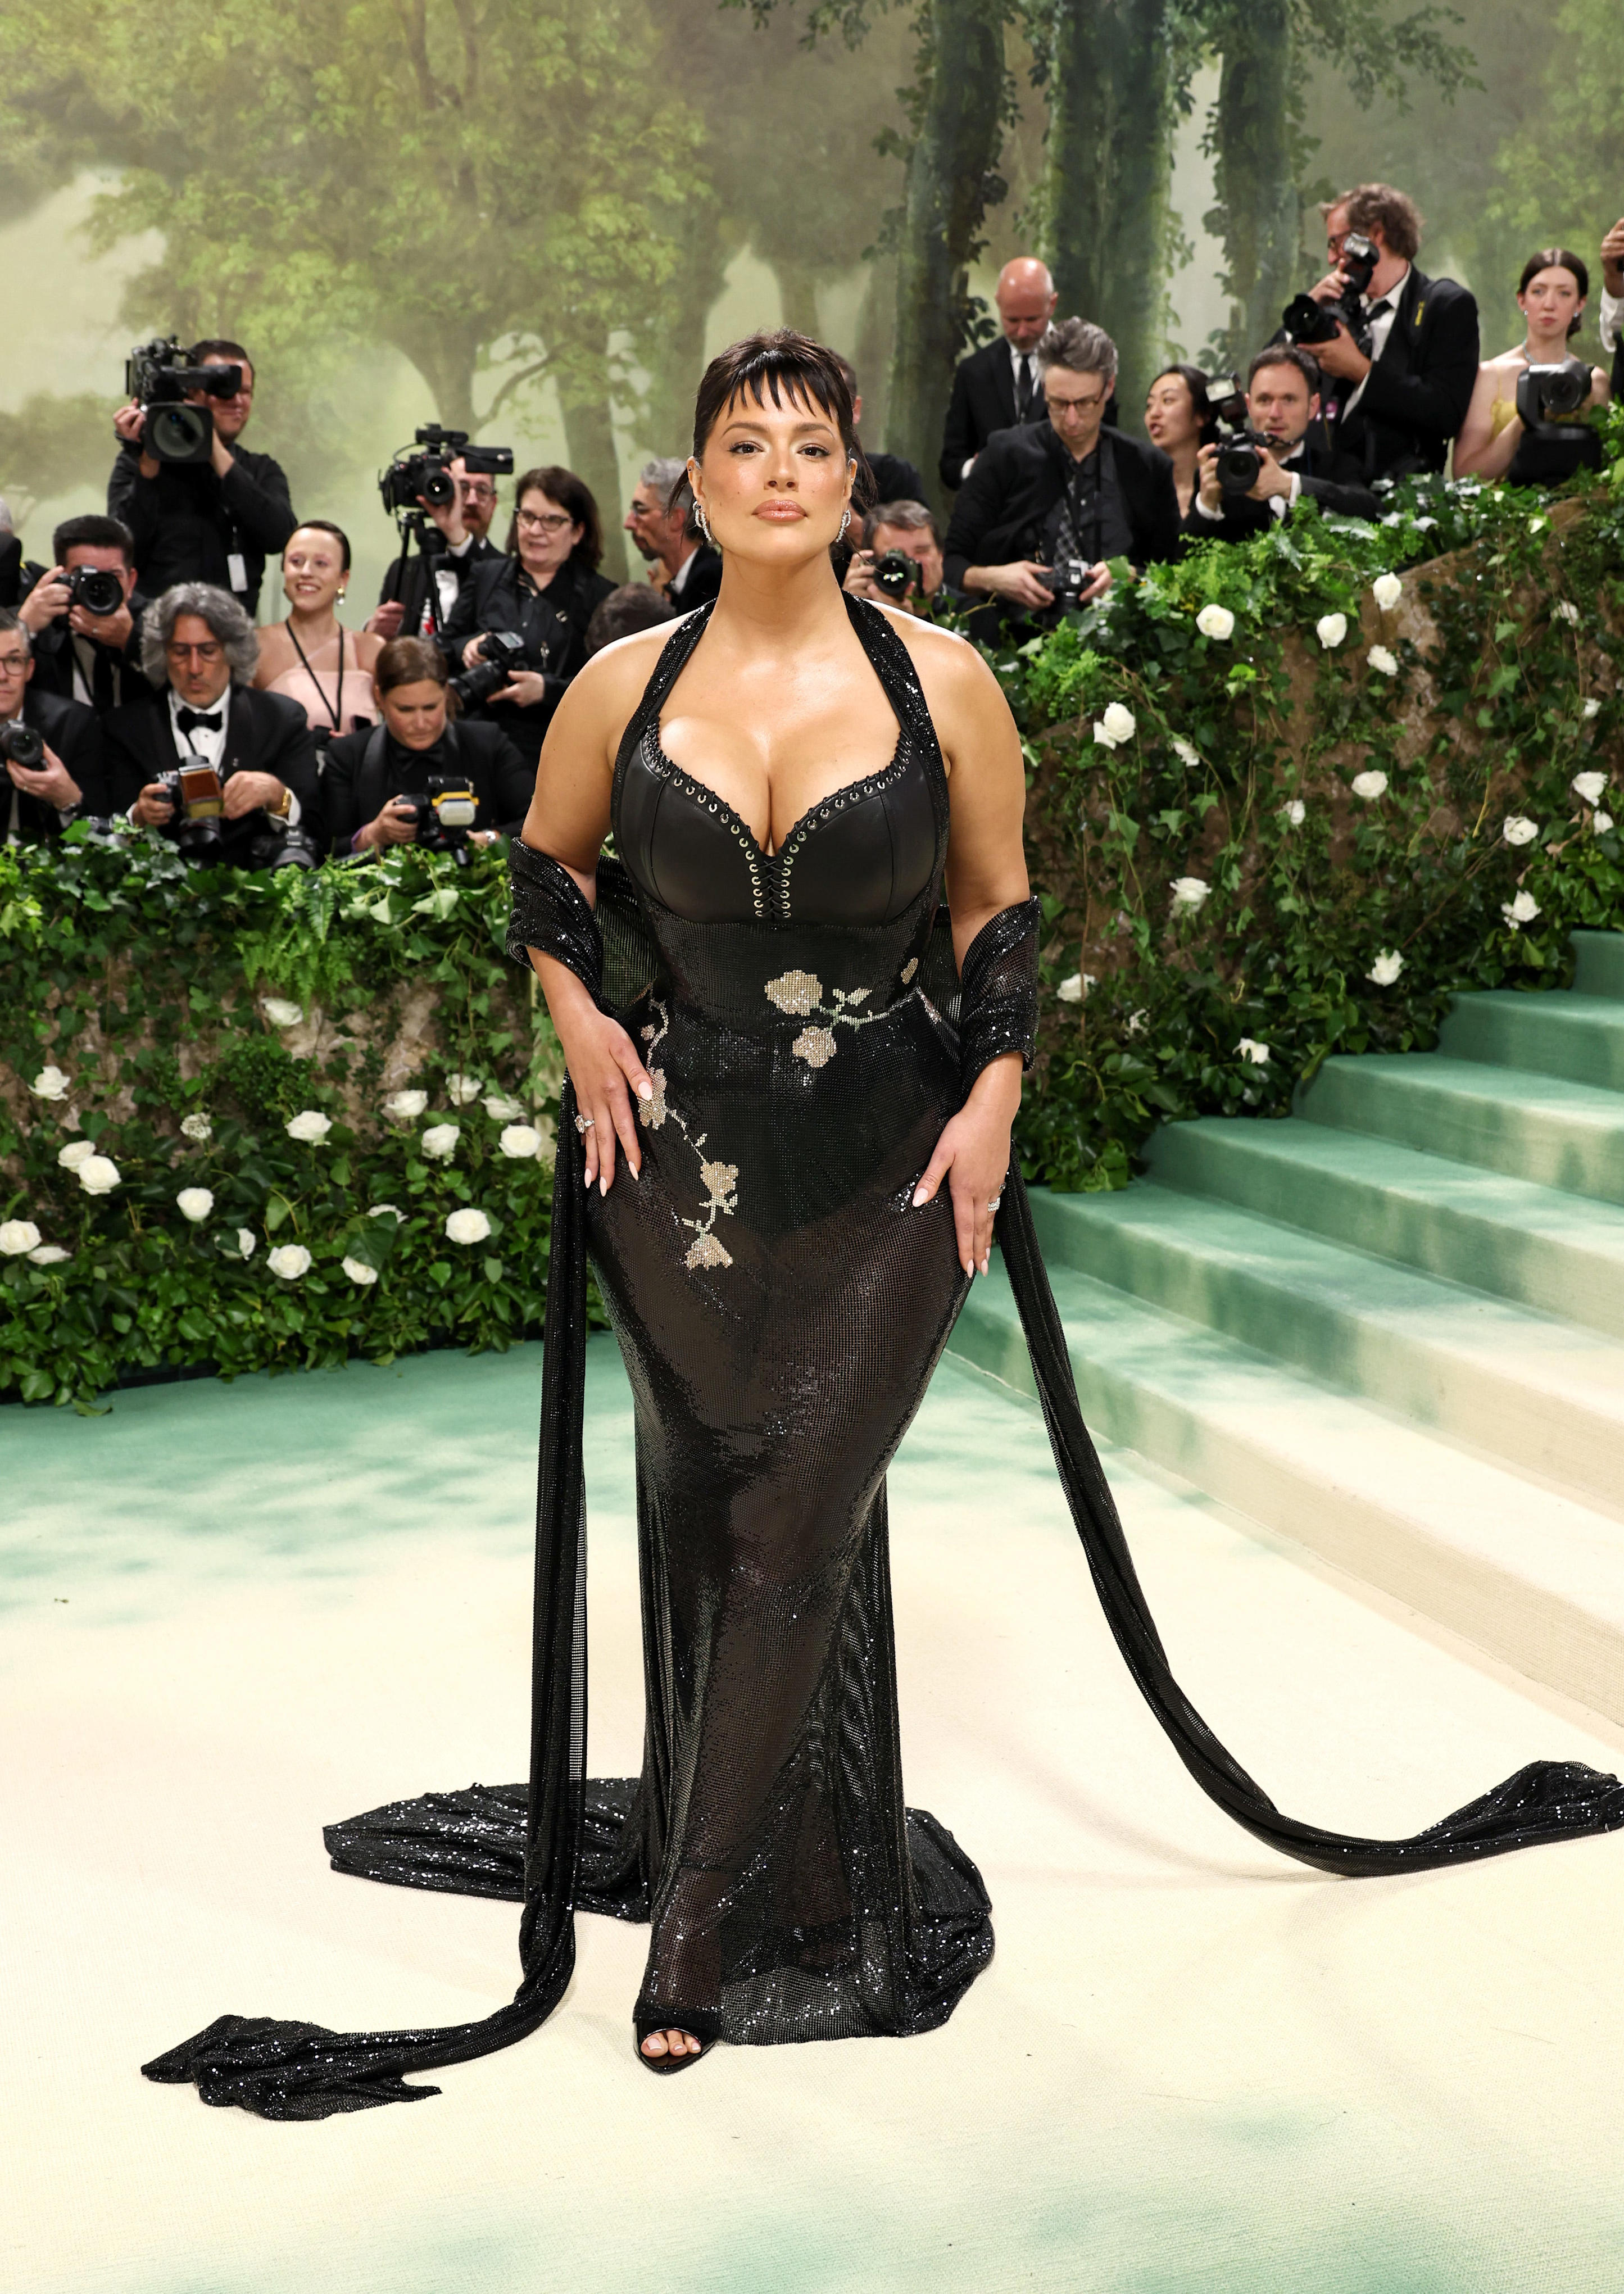 met gala 2024 highlights: demi moore, sydney sweeney, more wow in 'timeless' floral theme